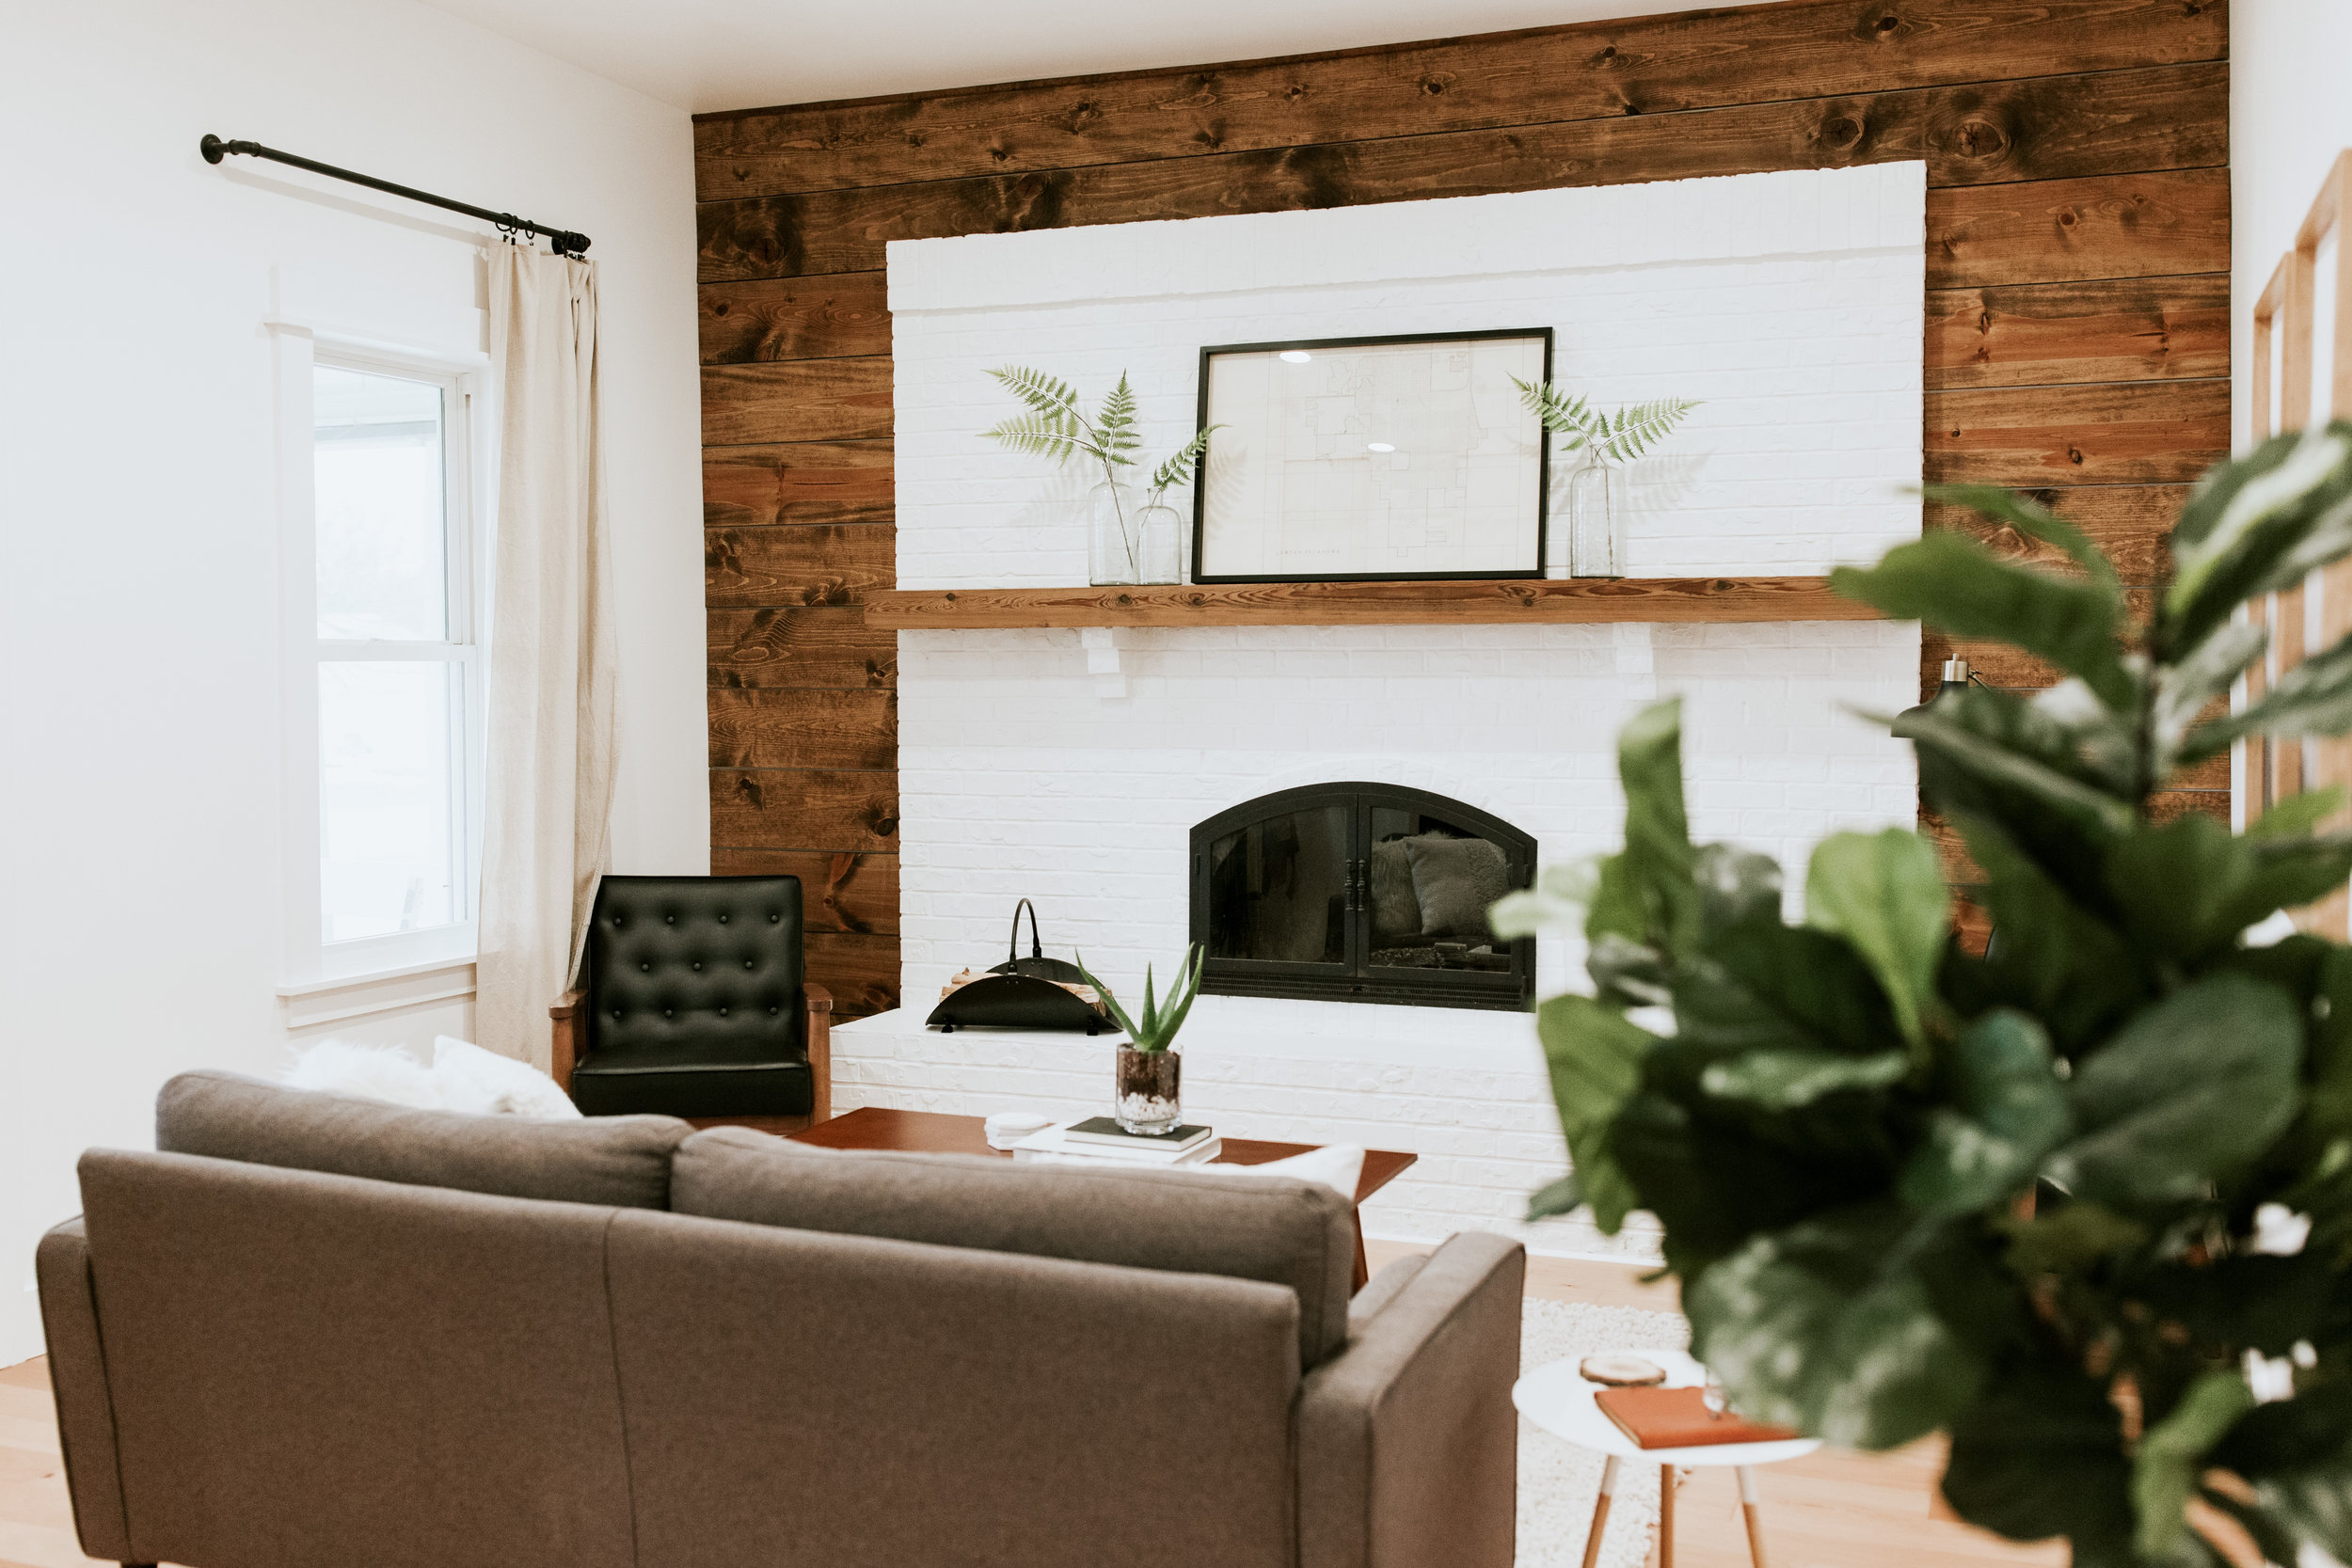 The full living room reveal - modern, mid century, outdoorsy, and minimal style home